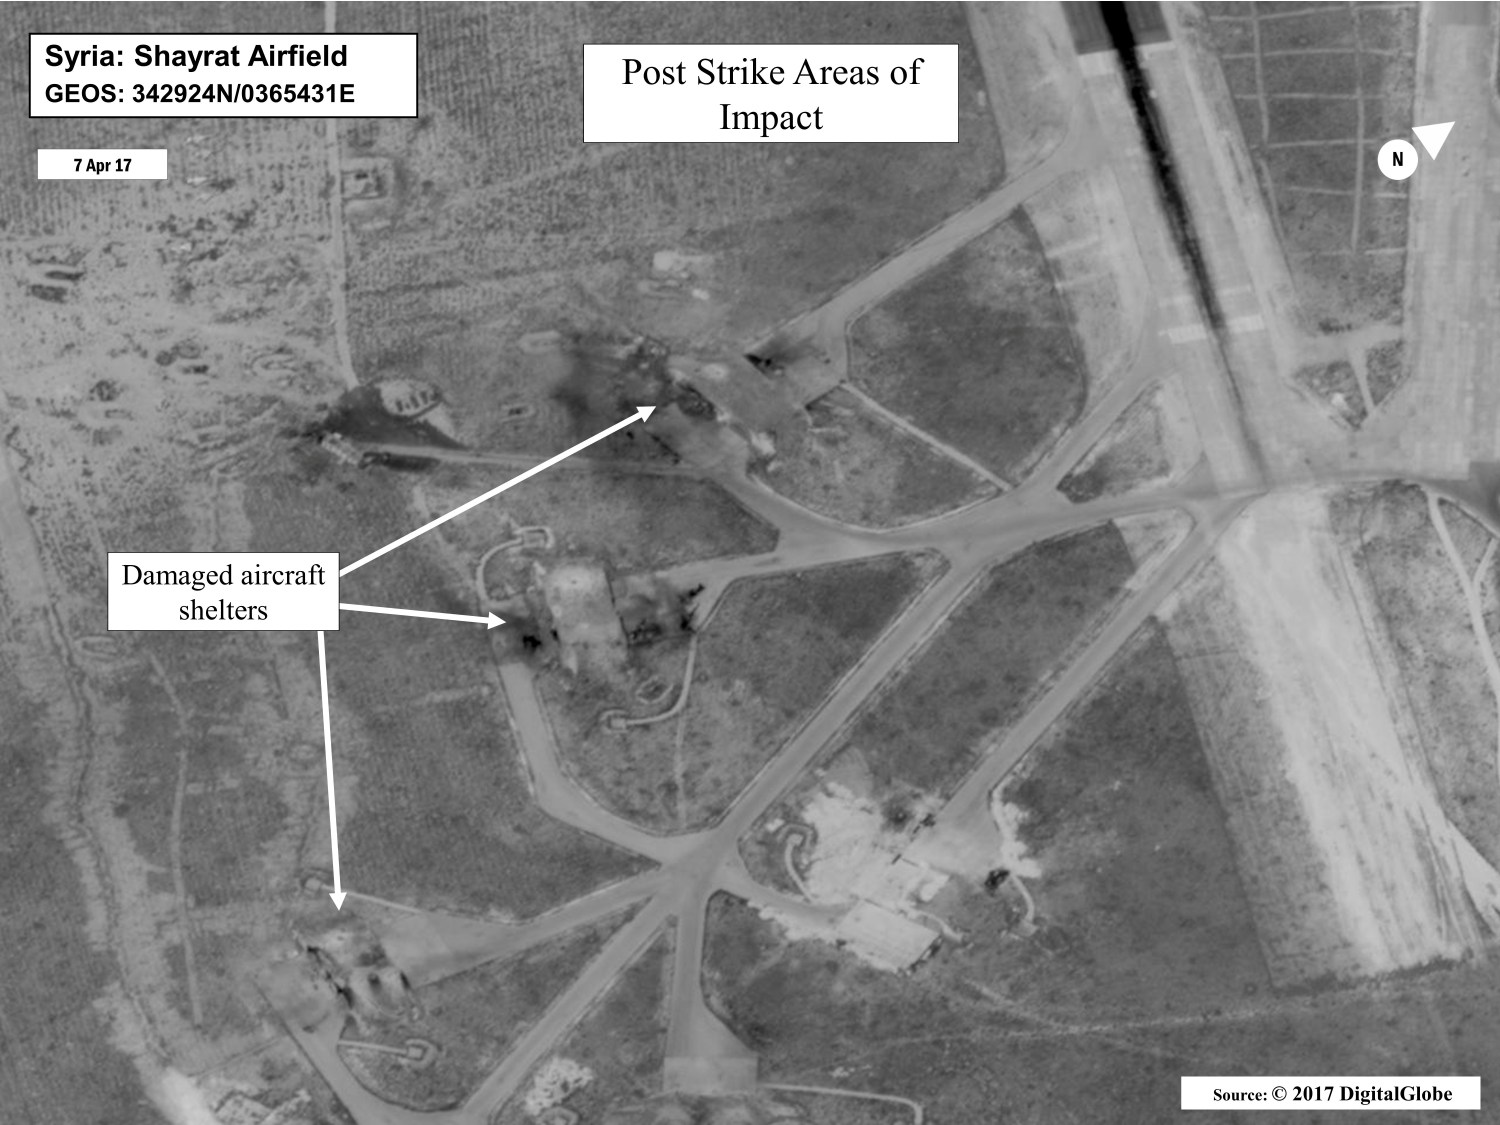 Battle damage assessment image of Shayrat Airfield, Syria, is seen in this DigitalGlobe satellite image, released by the Pentagon following U.S. Tomahawk Land Attack Missile strikes from Arleigh Burke-class guided-missile destroyers, the USS Ross and USS Porter on April 7, 2017. DigitalGlobe/Courtesy U.S. Department of Defense/Handout via REUTERS ATTENTION EDITORS - THIS IMAGE WAS PROVIDED BY A THIRD PARTY. EDITORIAL USE ONLY. MANDATORY CREDIT. - RTX34MOV